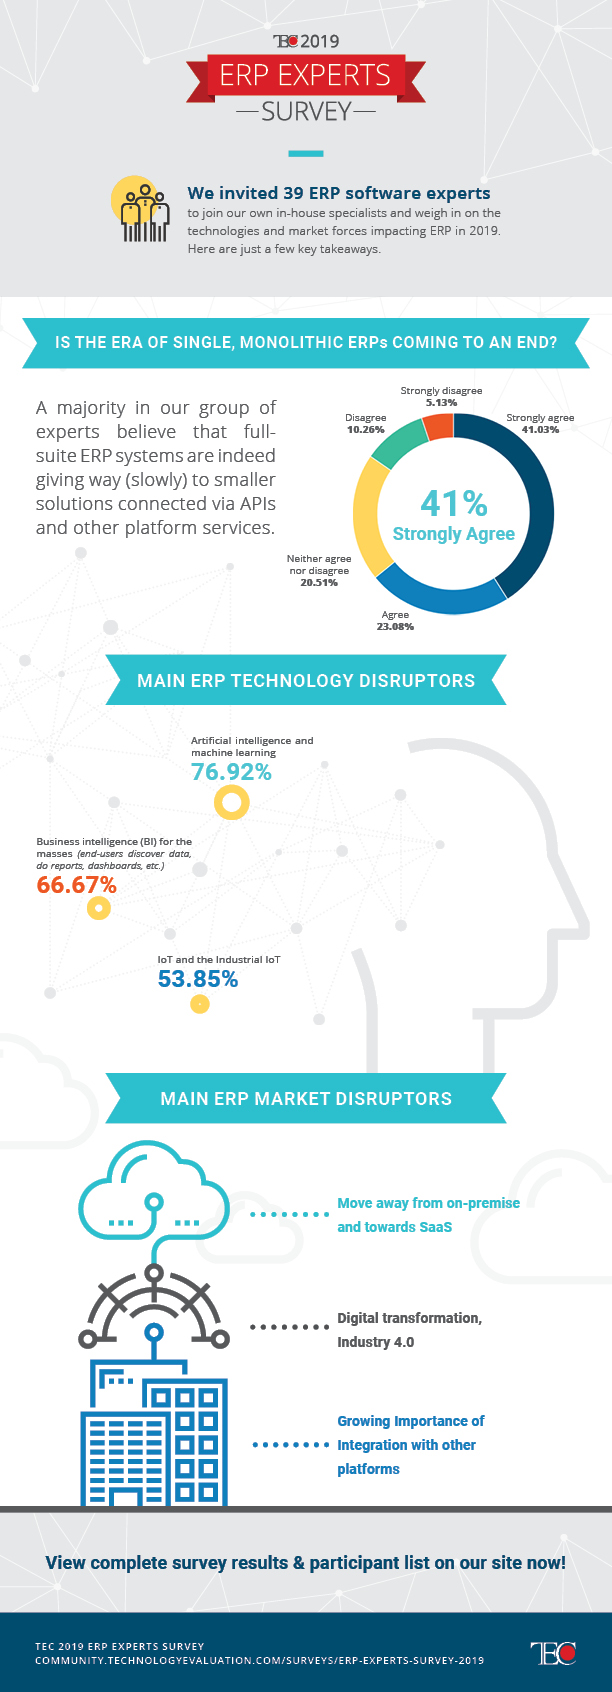 TEC 2019 ERP Experts Survey INFOGRAPHIC, Industry Today